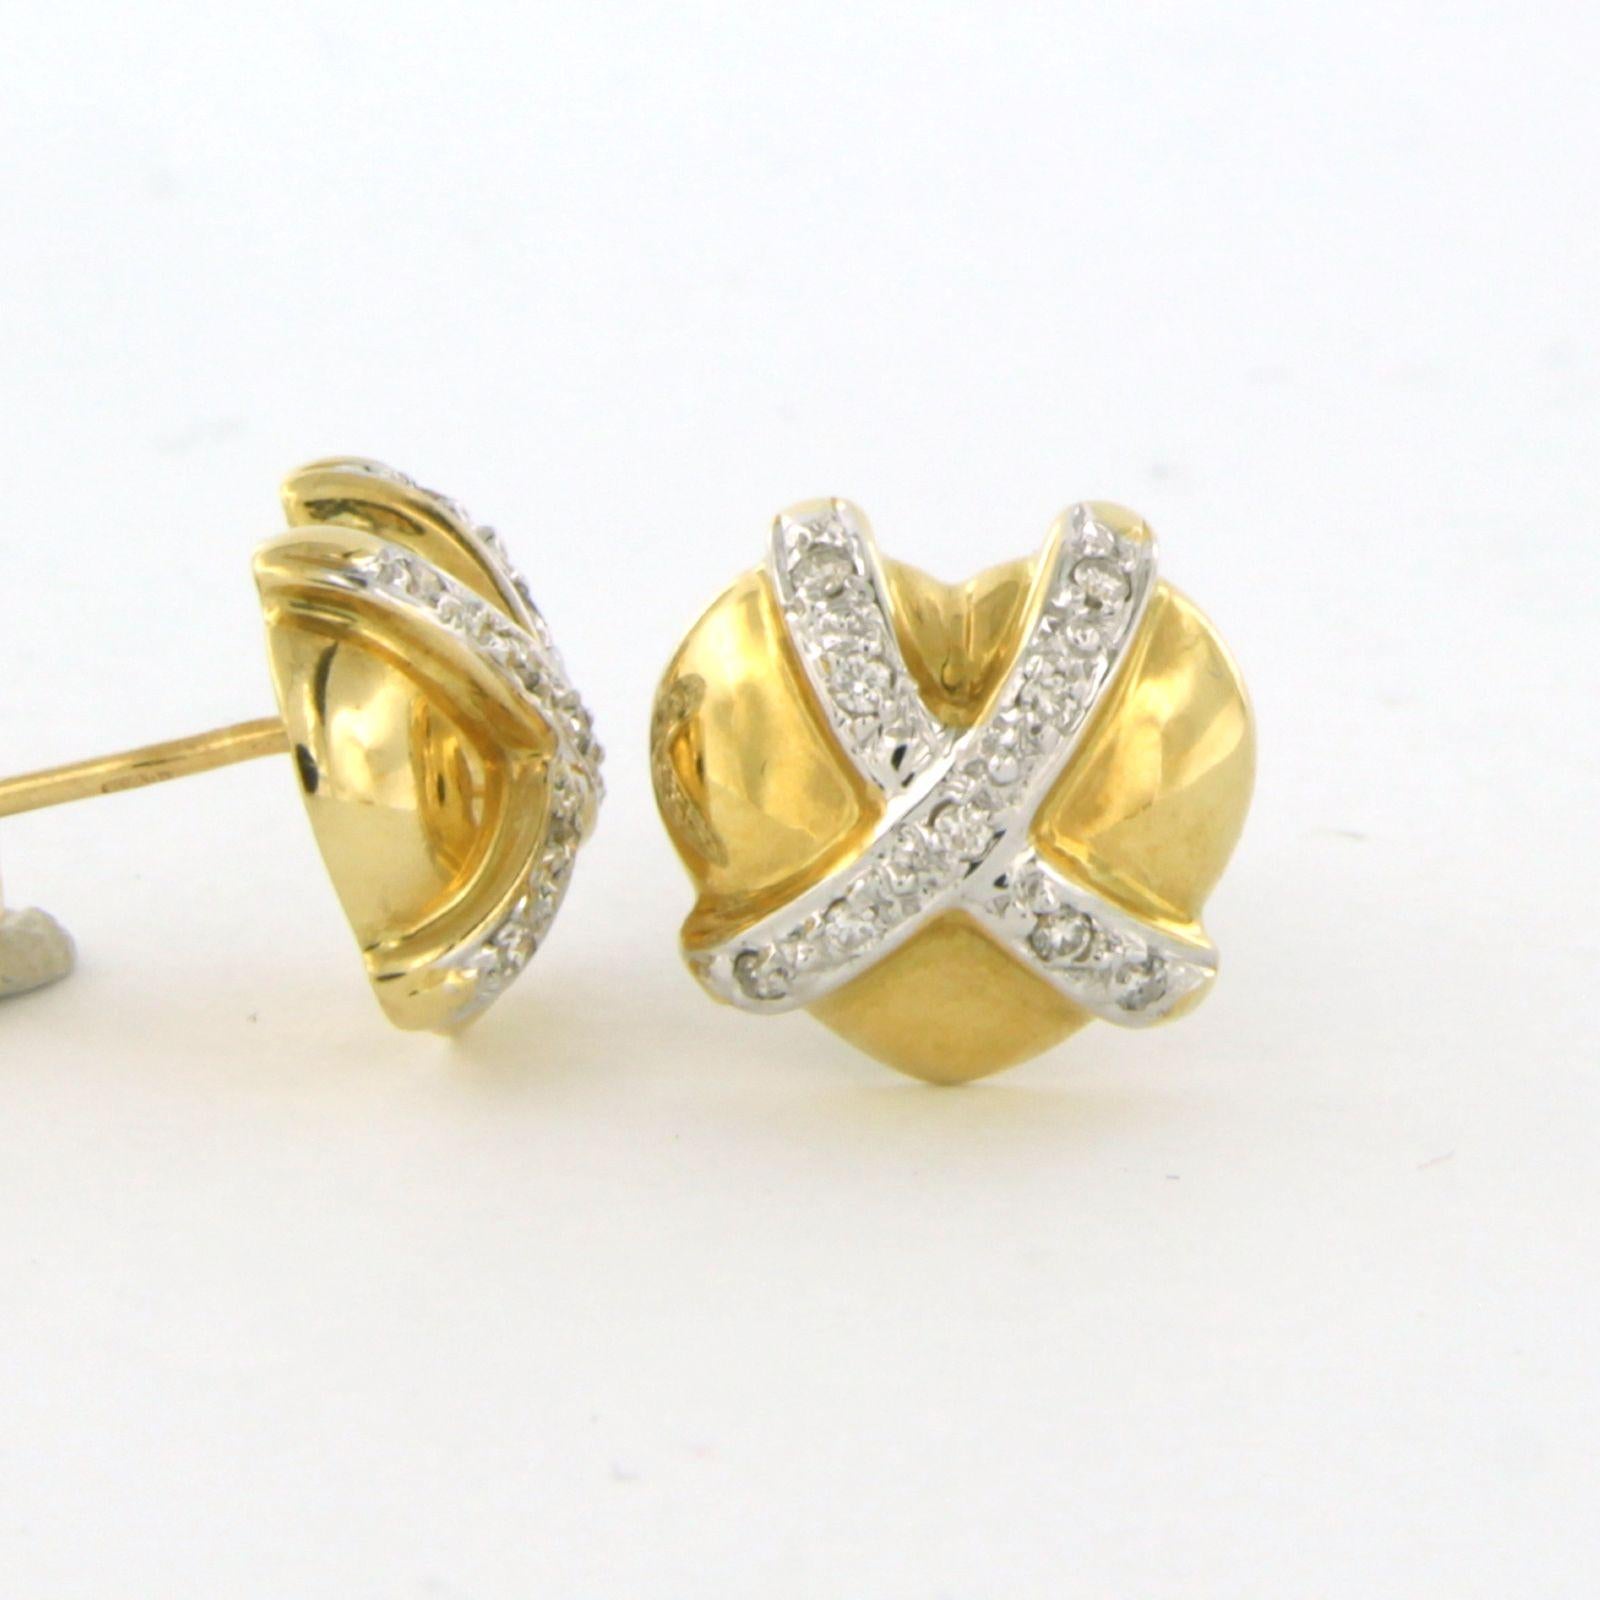 Modern Earrings studs set with diamonds 18k bicolour gold For Sale